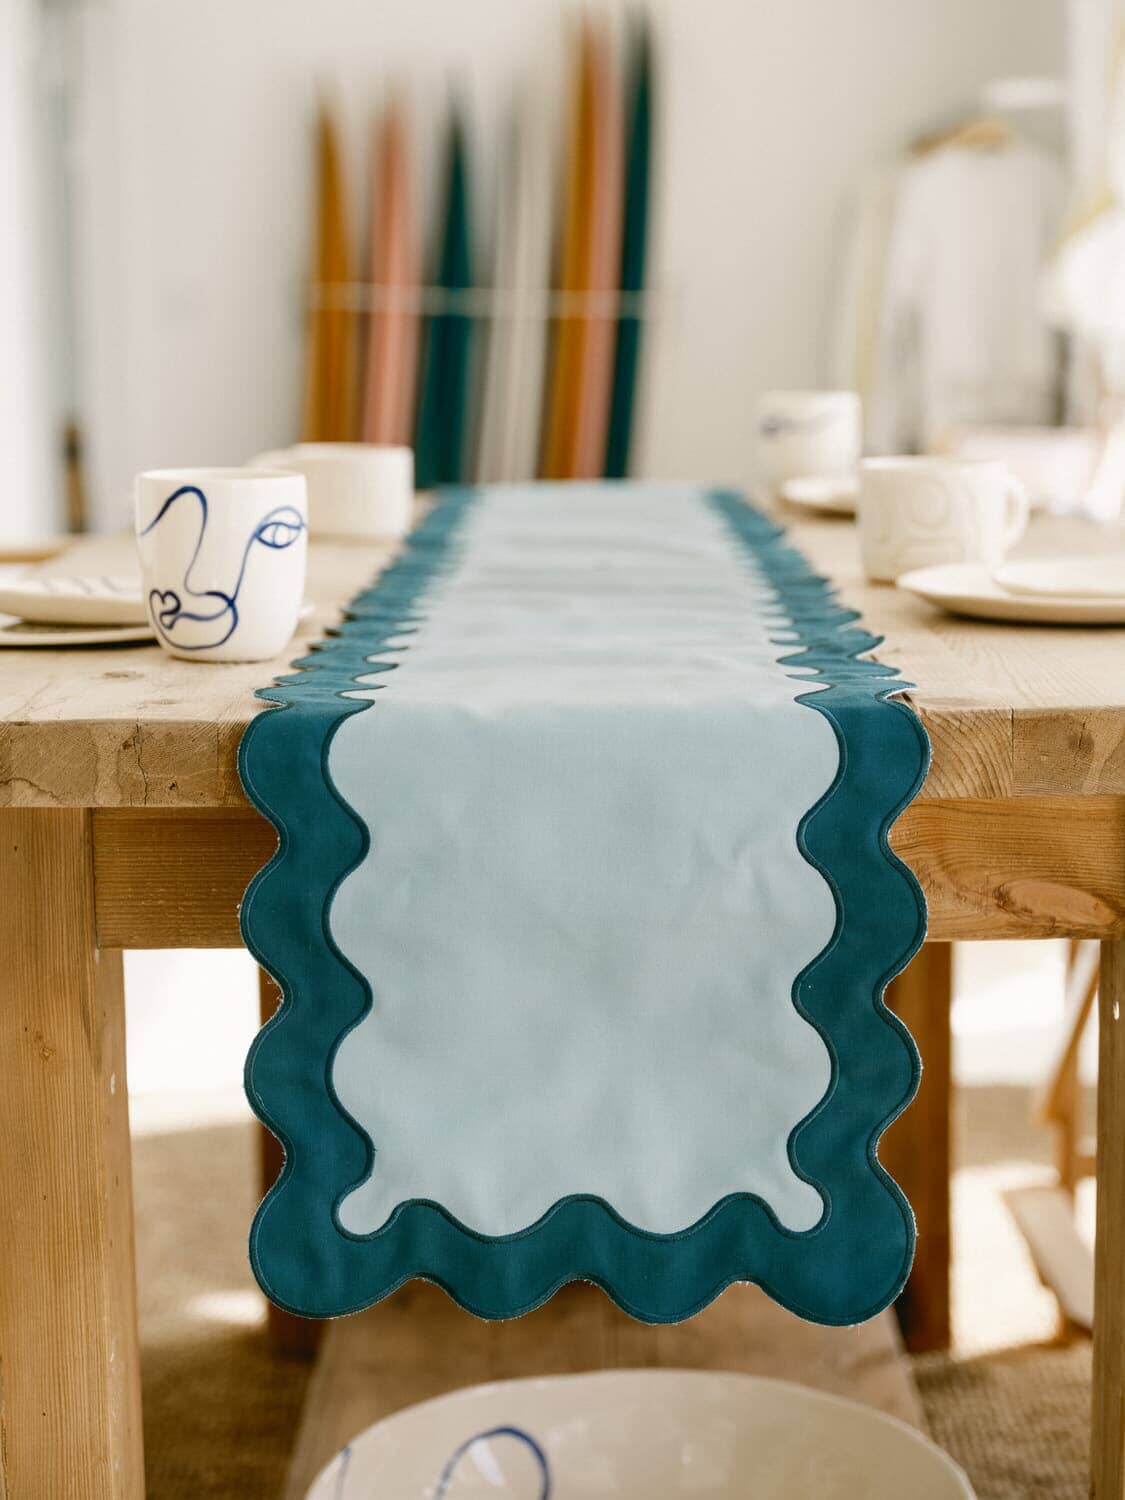 riviera green table runner hanging off edge of table